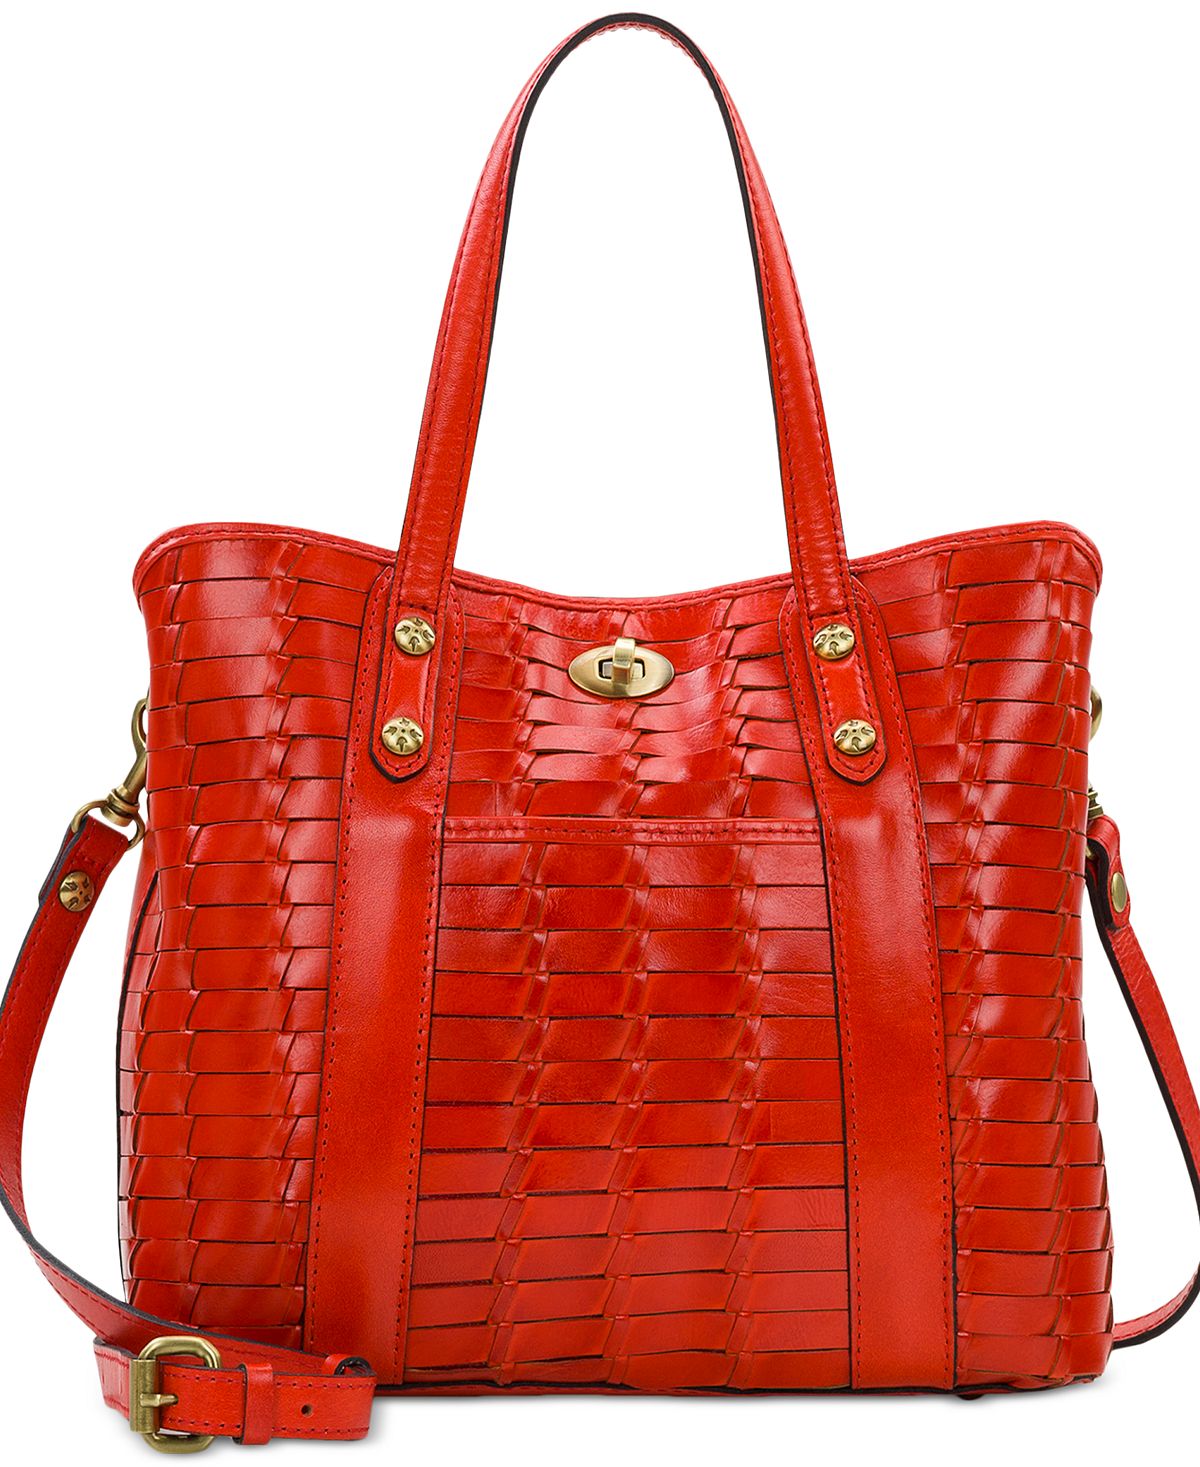 Patricia Nash - Darby Small Woven Leather Crossbody Tote